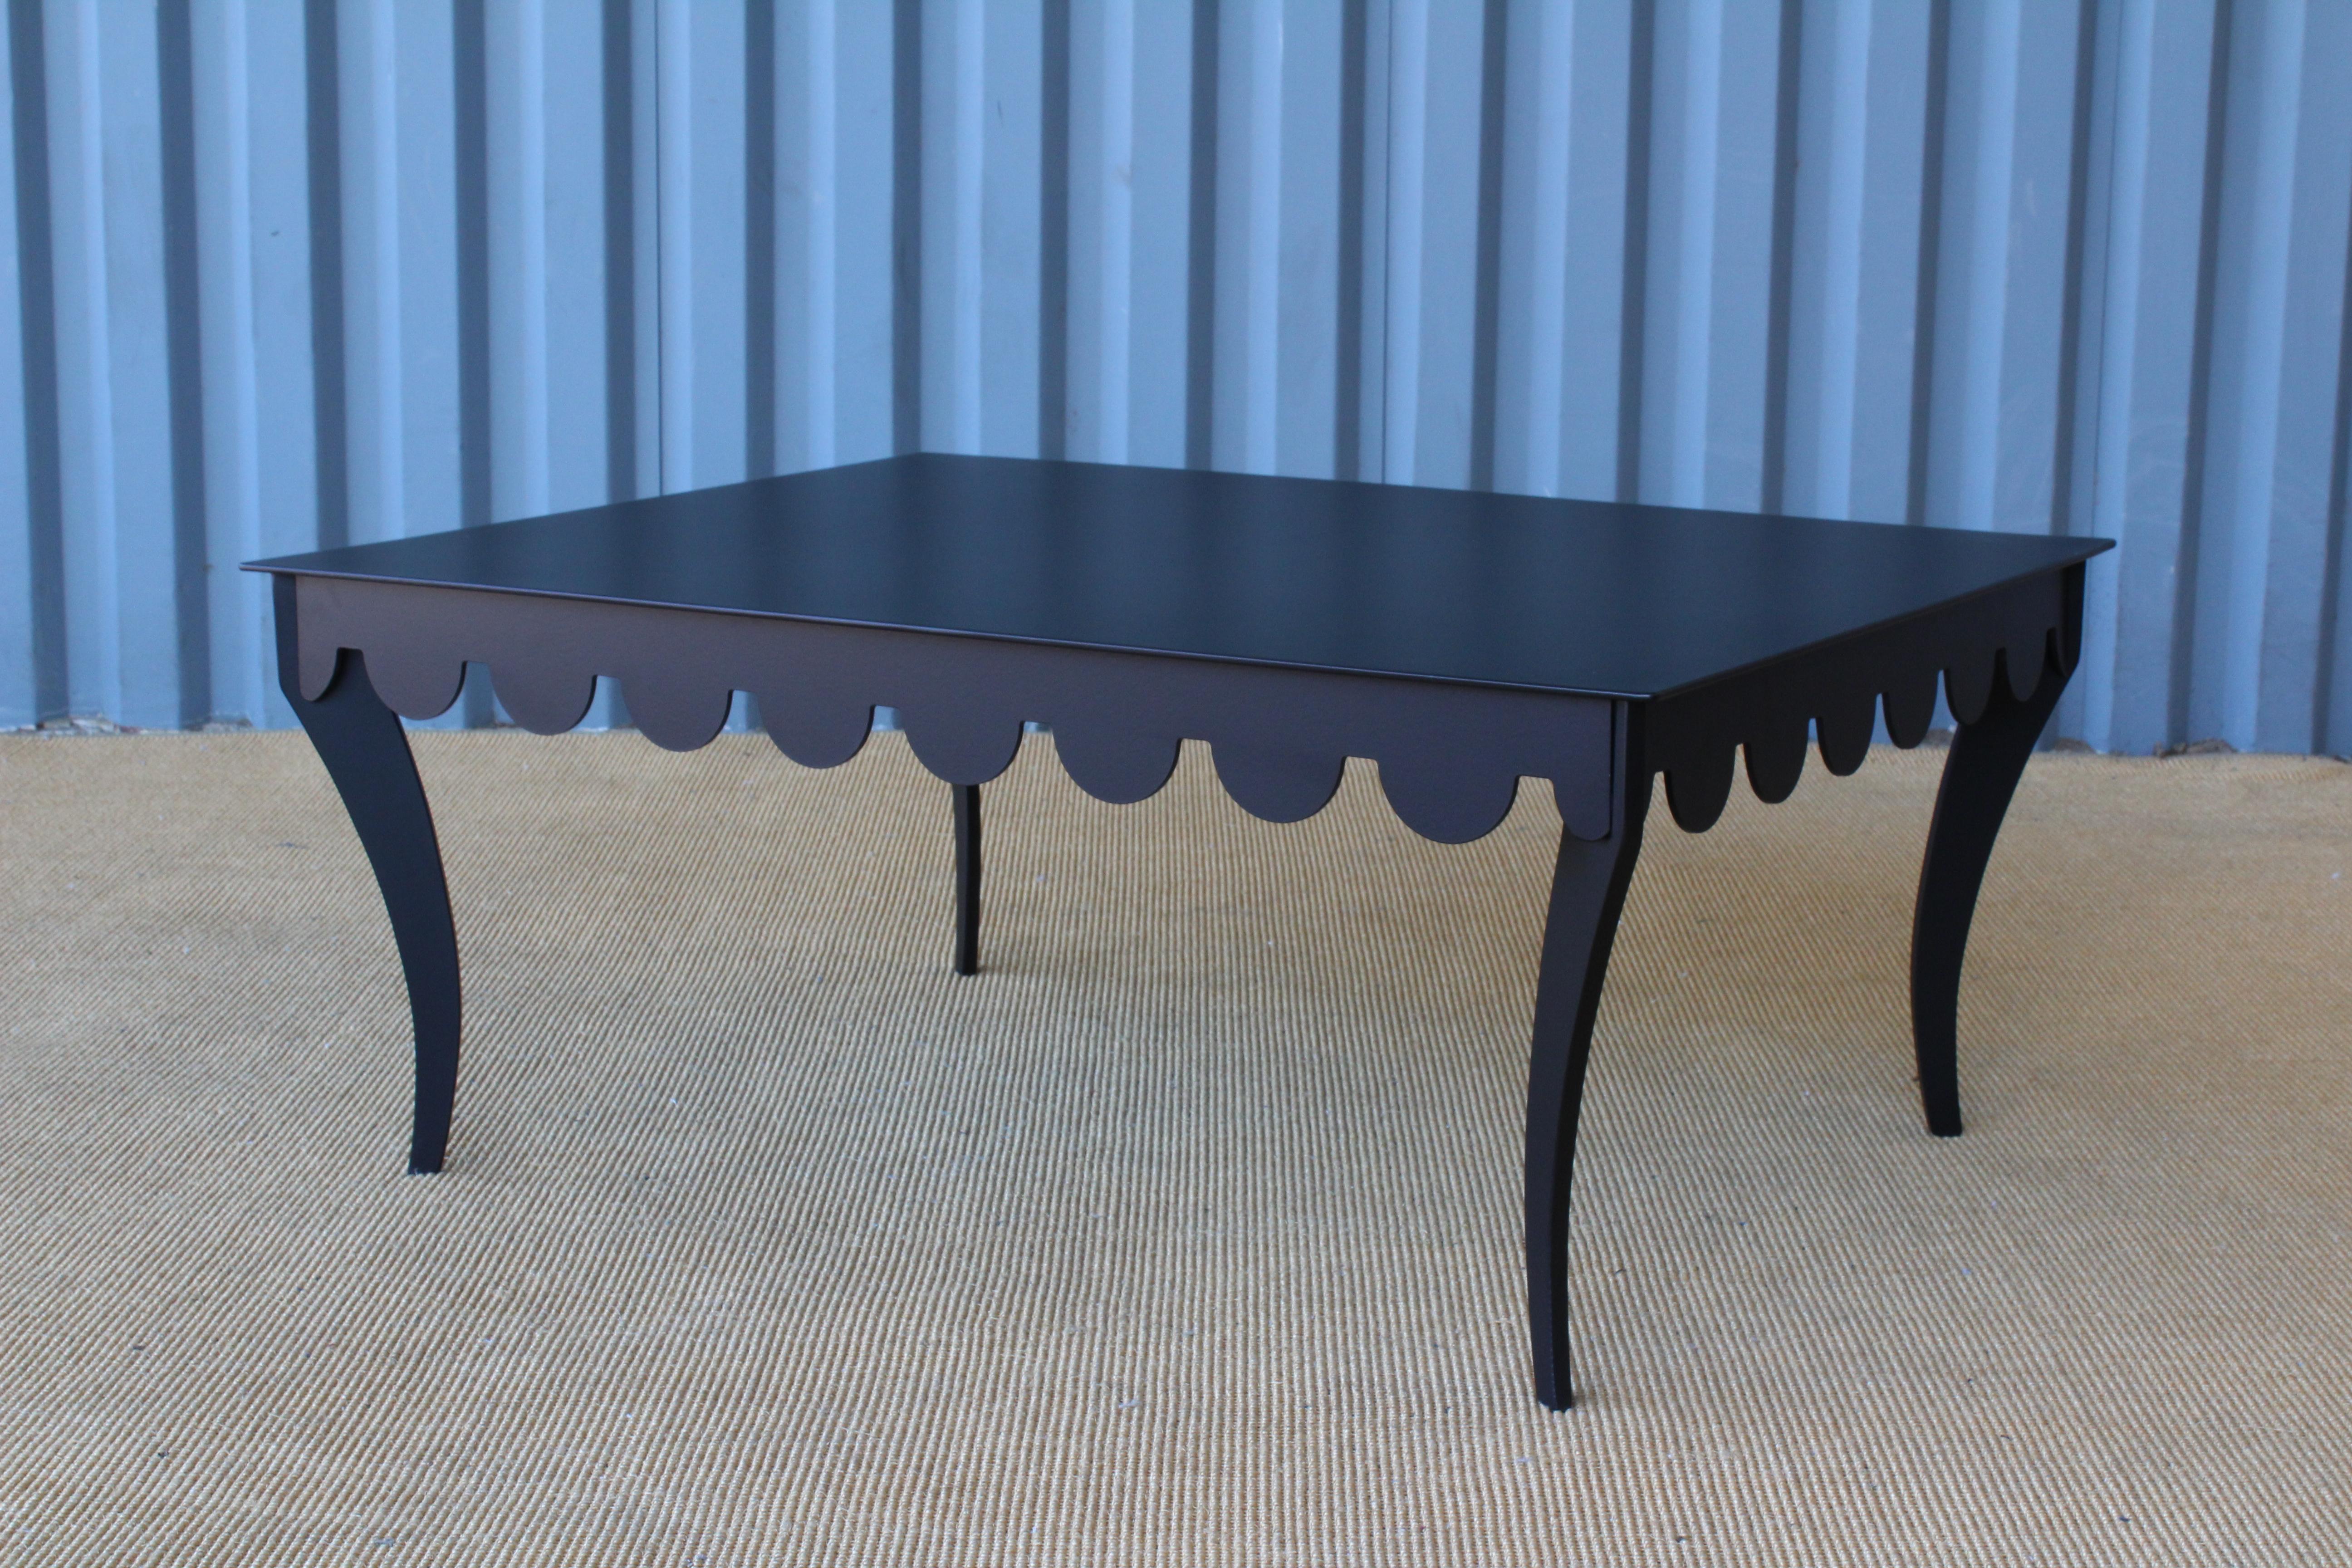 Solid steel indoor or outdoor coffee table. Recently powder coated in black. Features a scalloped cut detailed edge and Klismos style legs. Unknown make, unknown year. Possibly a one of a kind table.